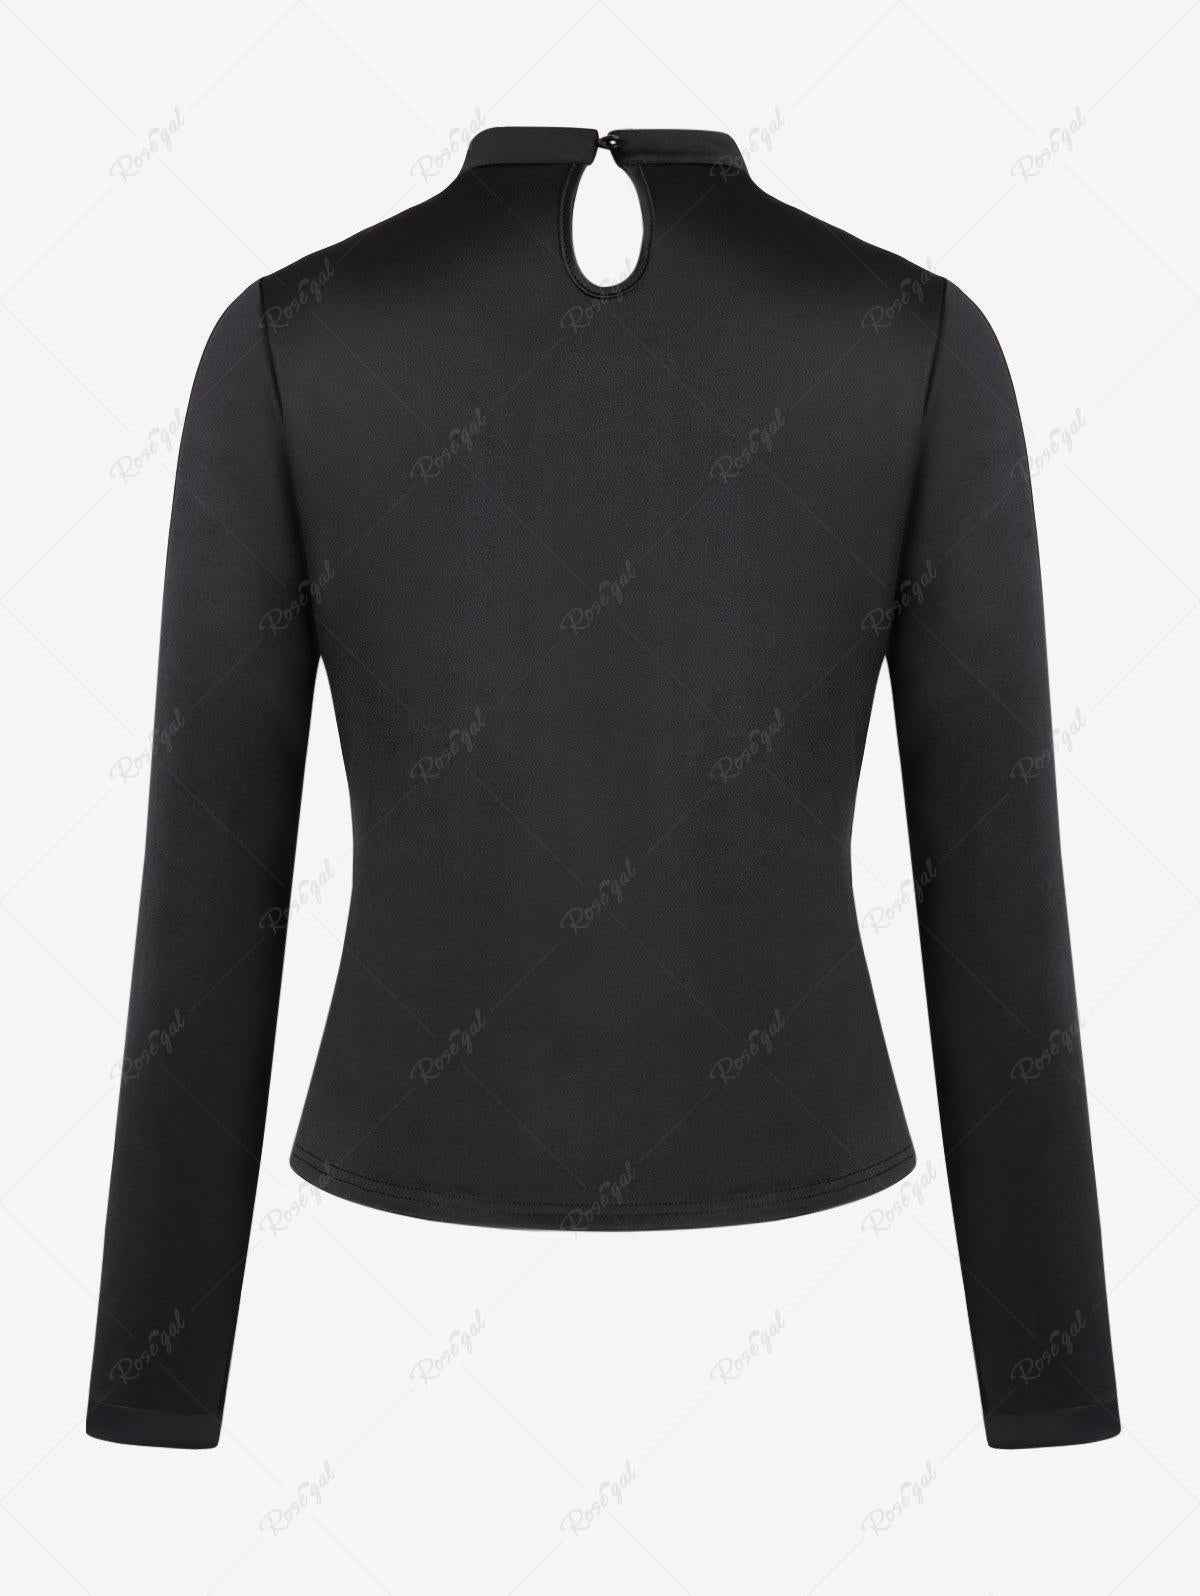 Long-sleeved top with double-layer mesh, Gothicana by EMP Long-sleeve Shirt